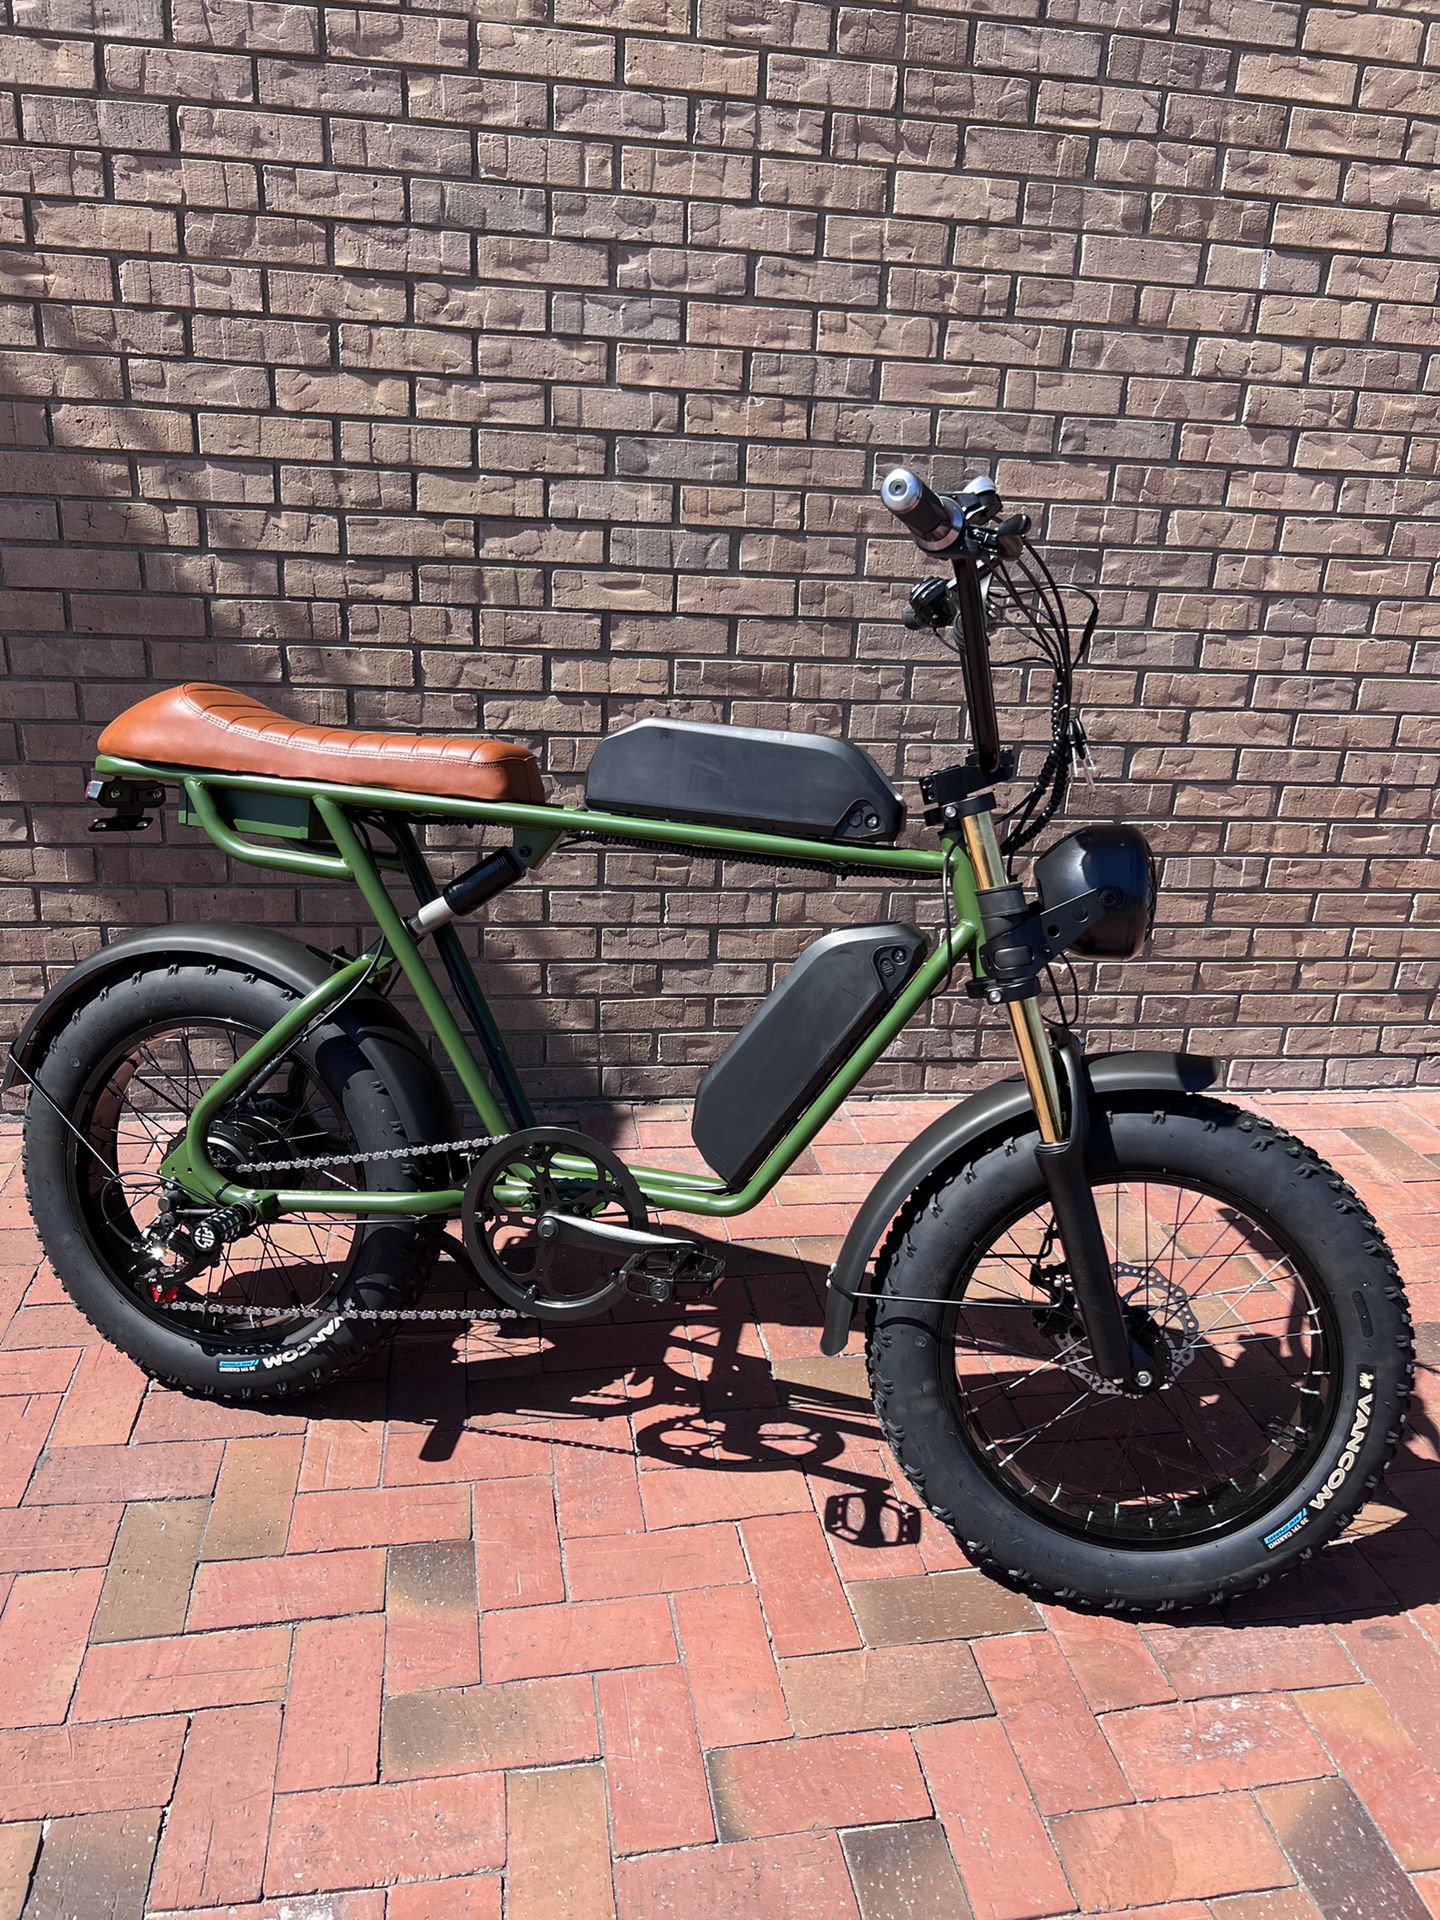 NEW! Electric Bike, Full Suspension, 750 Watt, Up To 85 Miles Distance, 33MPH, Dual Rider, Black Or Green 